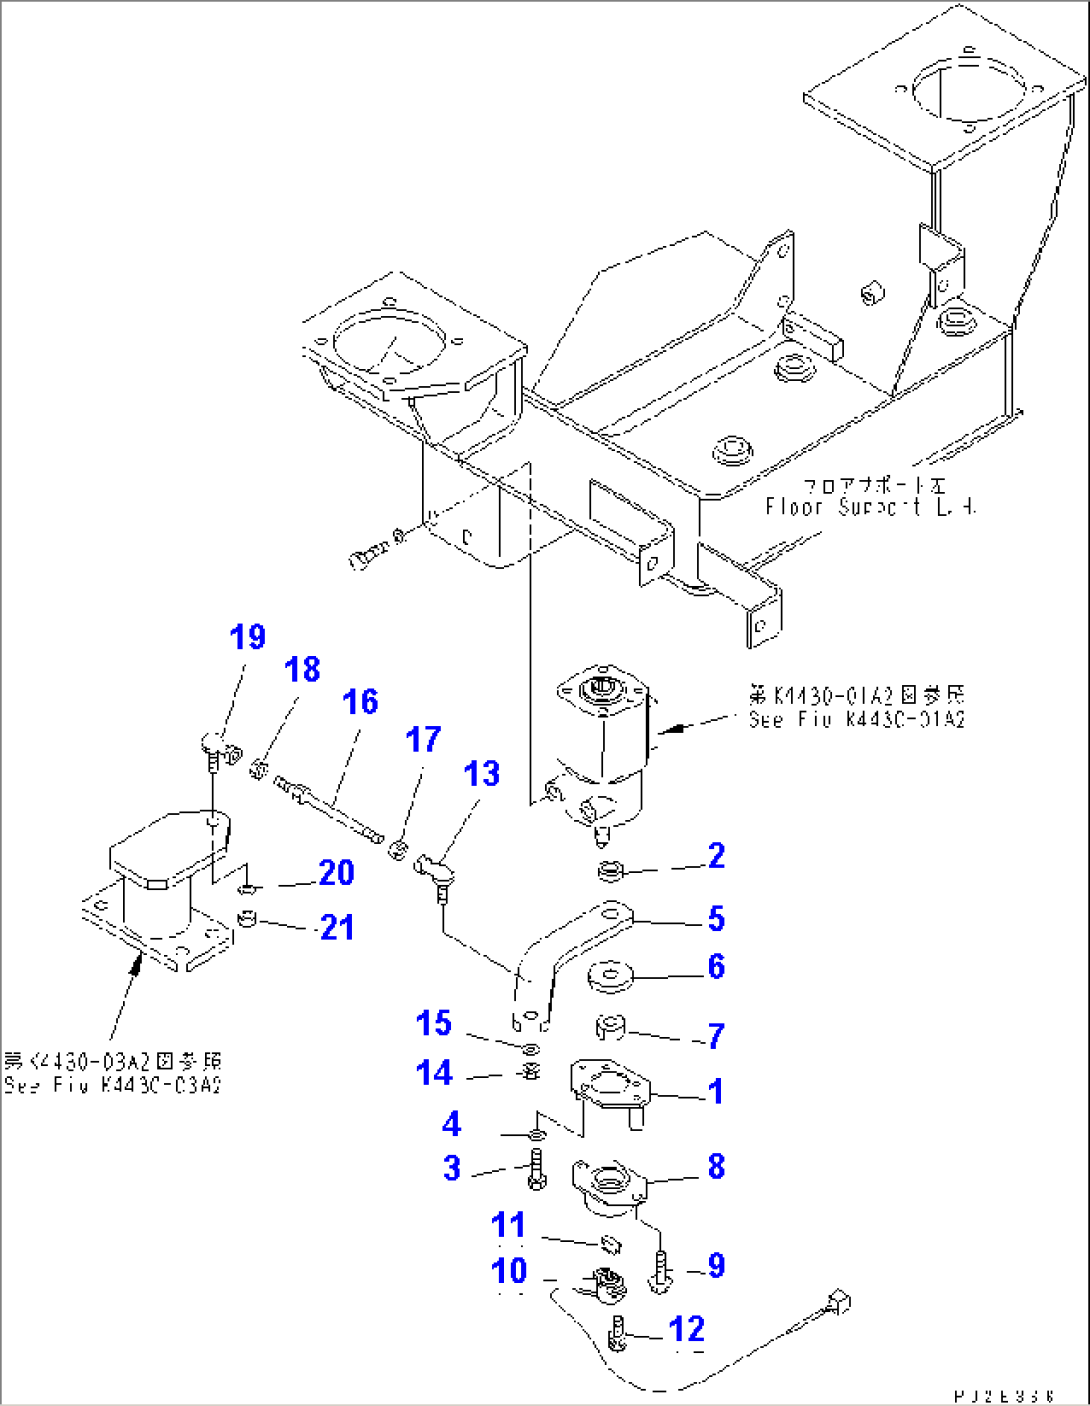 STEERING AND TRANSMISSION CONTROL (LINKAGE AND SENSOR) (WITH ADVANCED JOY STICK STEERING)(#51001-51074)